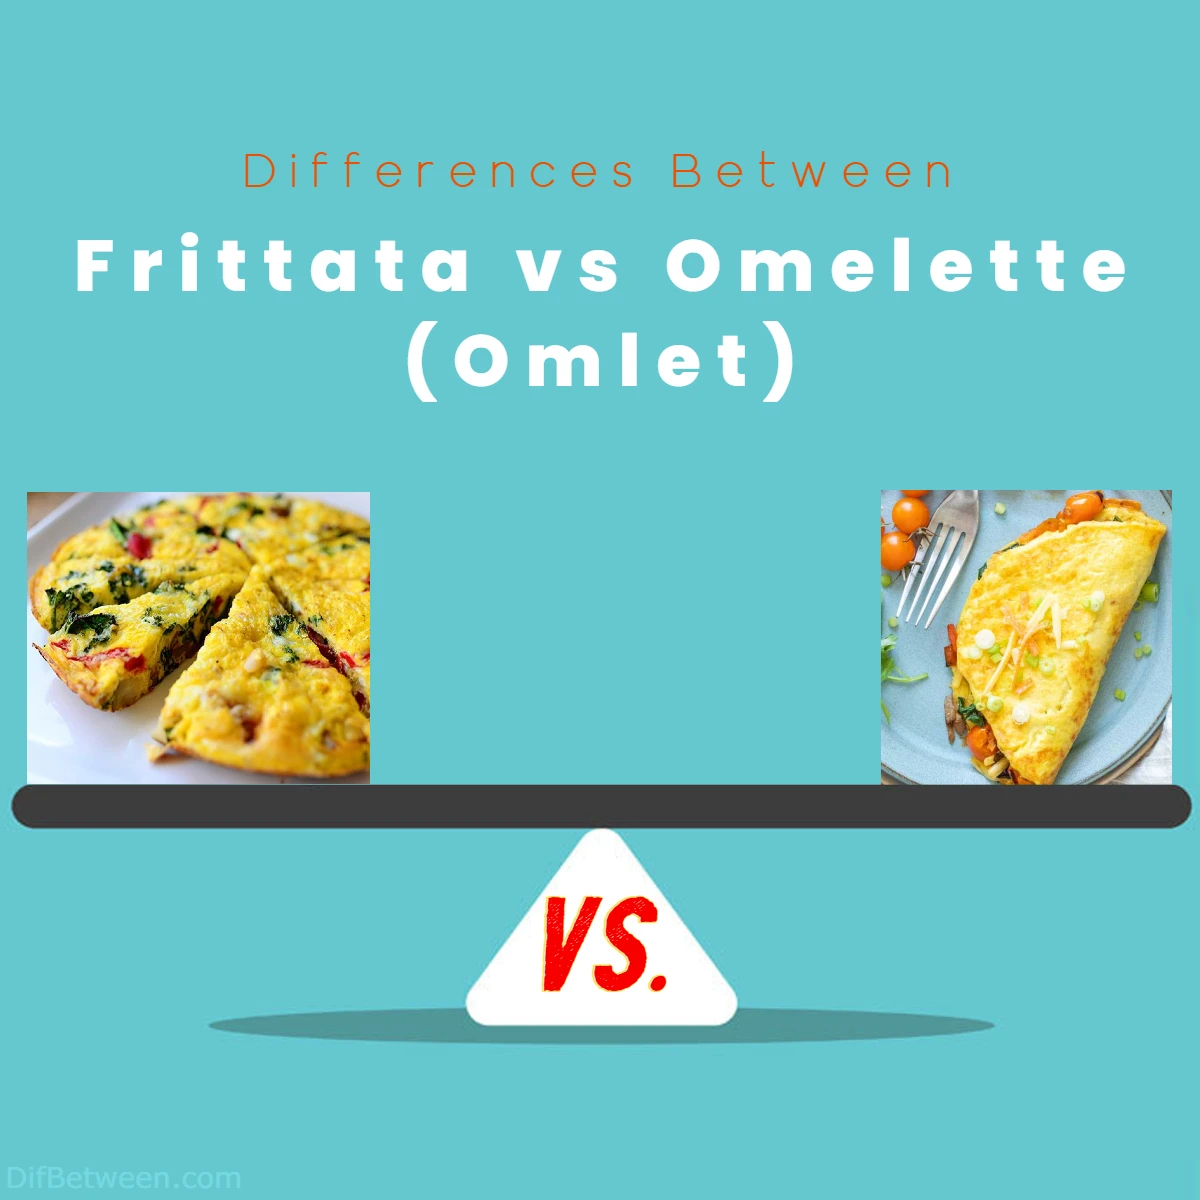 Differences Between Omelette Omlet and Frittata